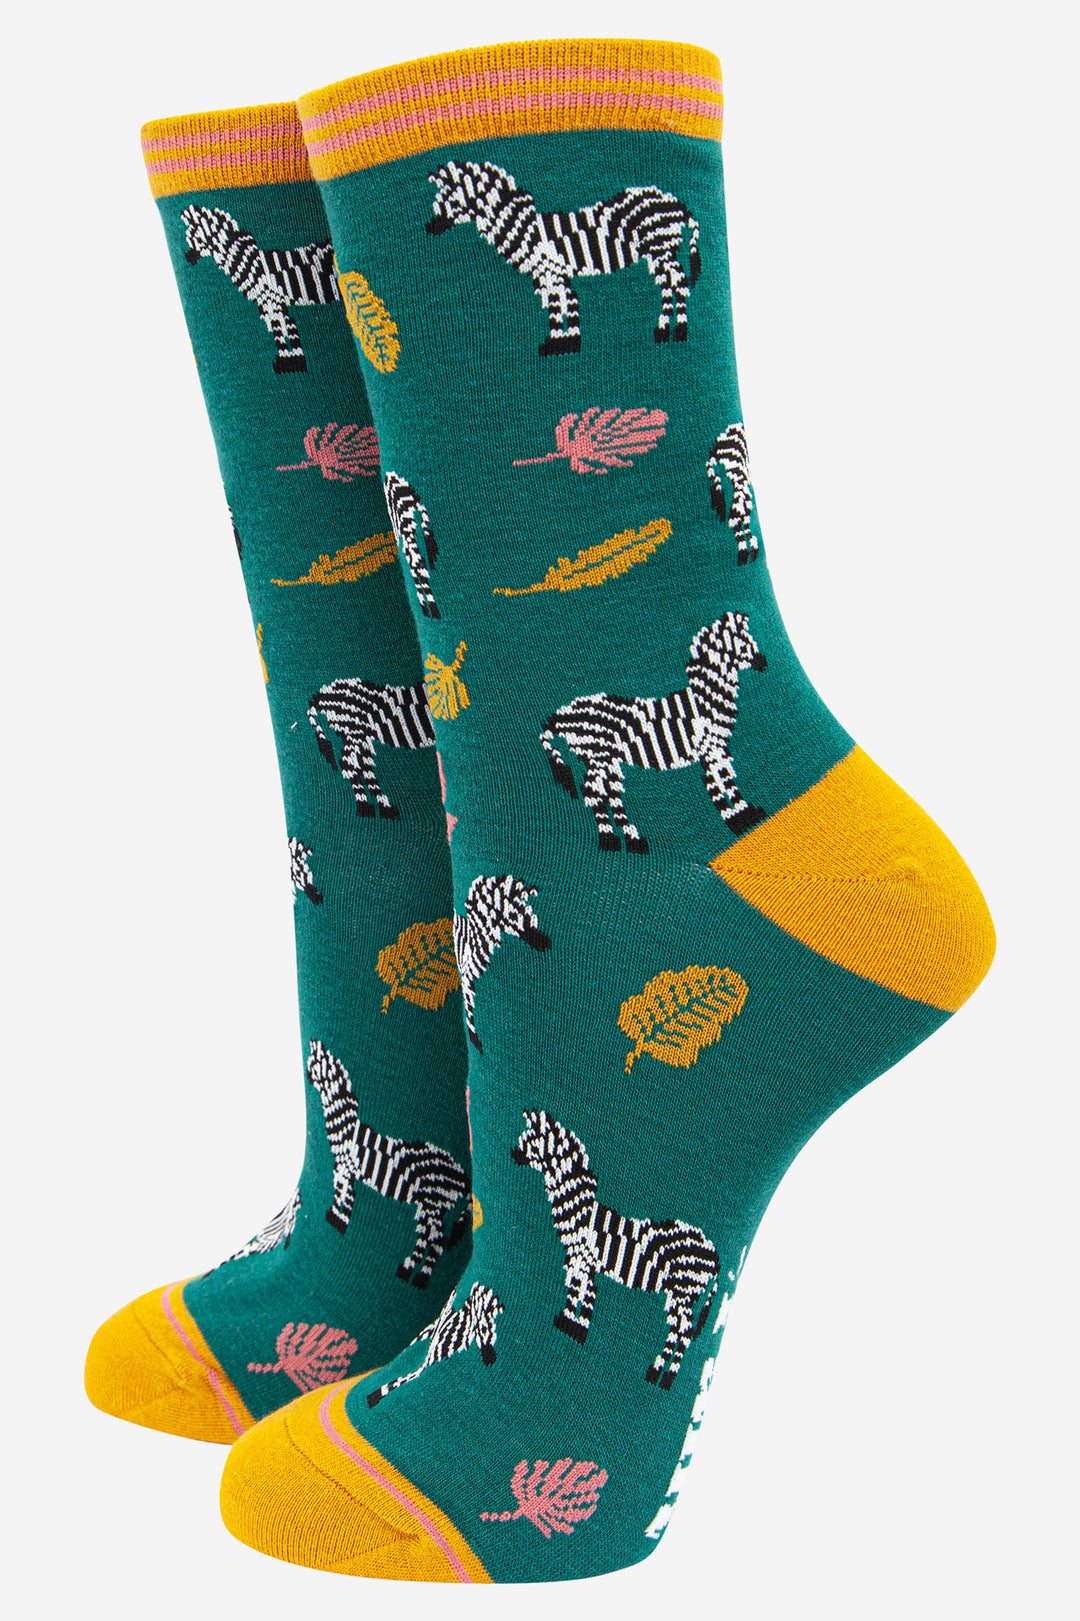 green and yellow bamboo ankle socks featuring an all over pattern ofzebras and leaves